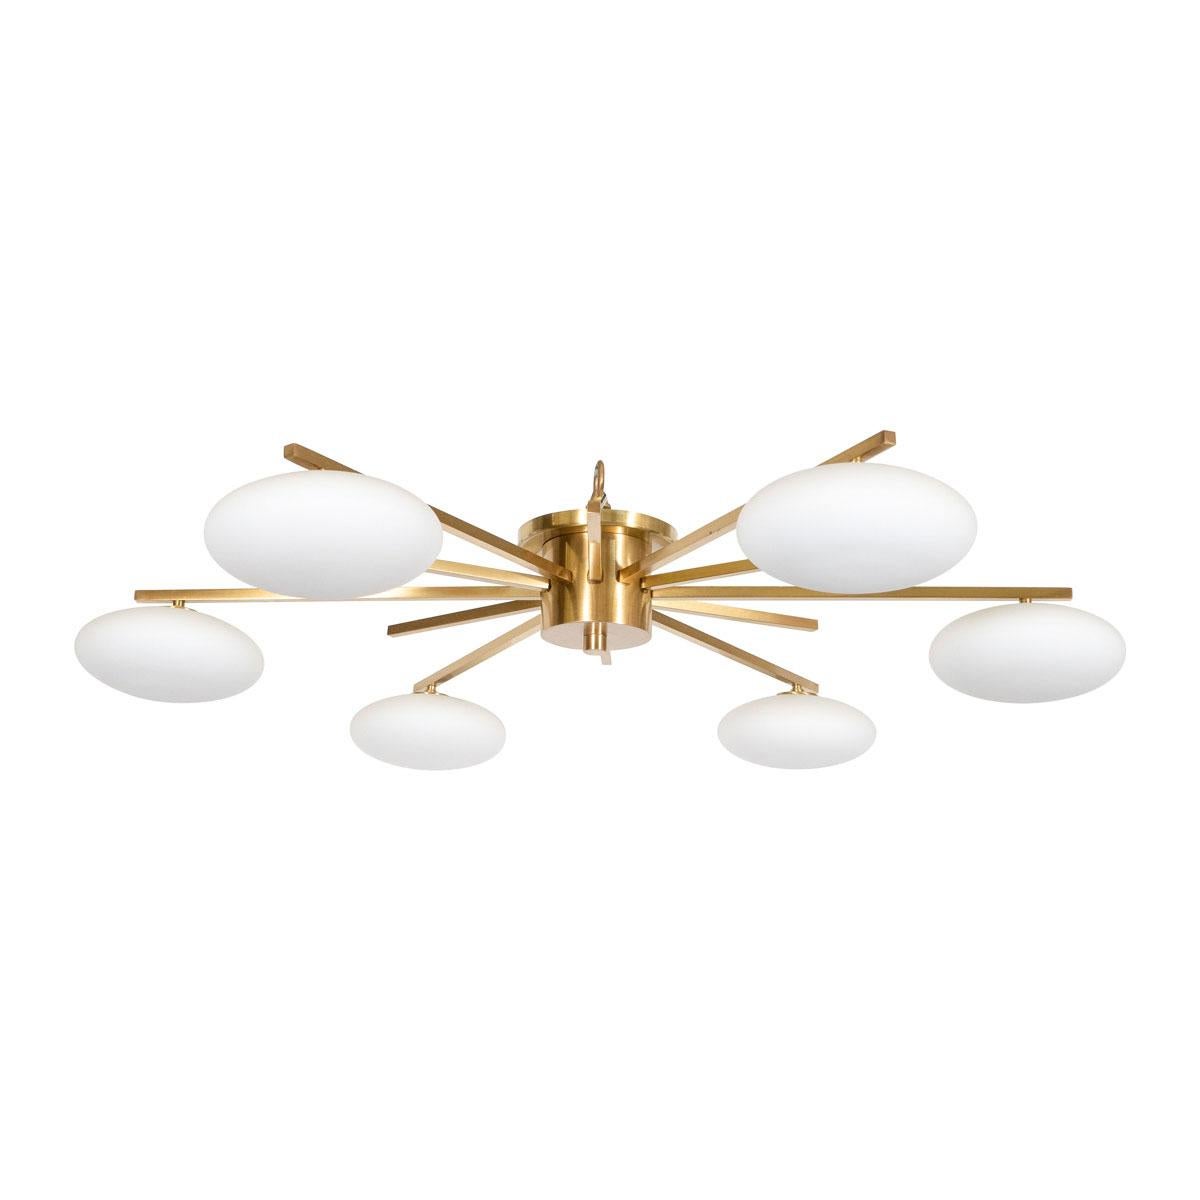 Brass starburst flush mount fixture with ovoid frosted glass shades.